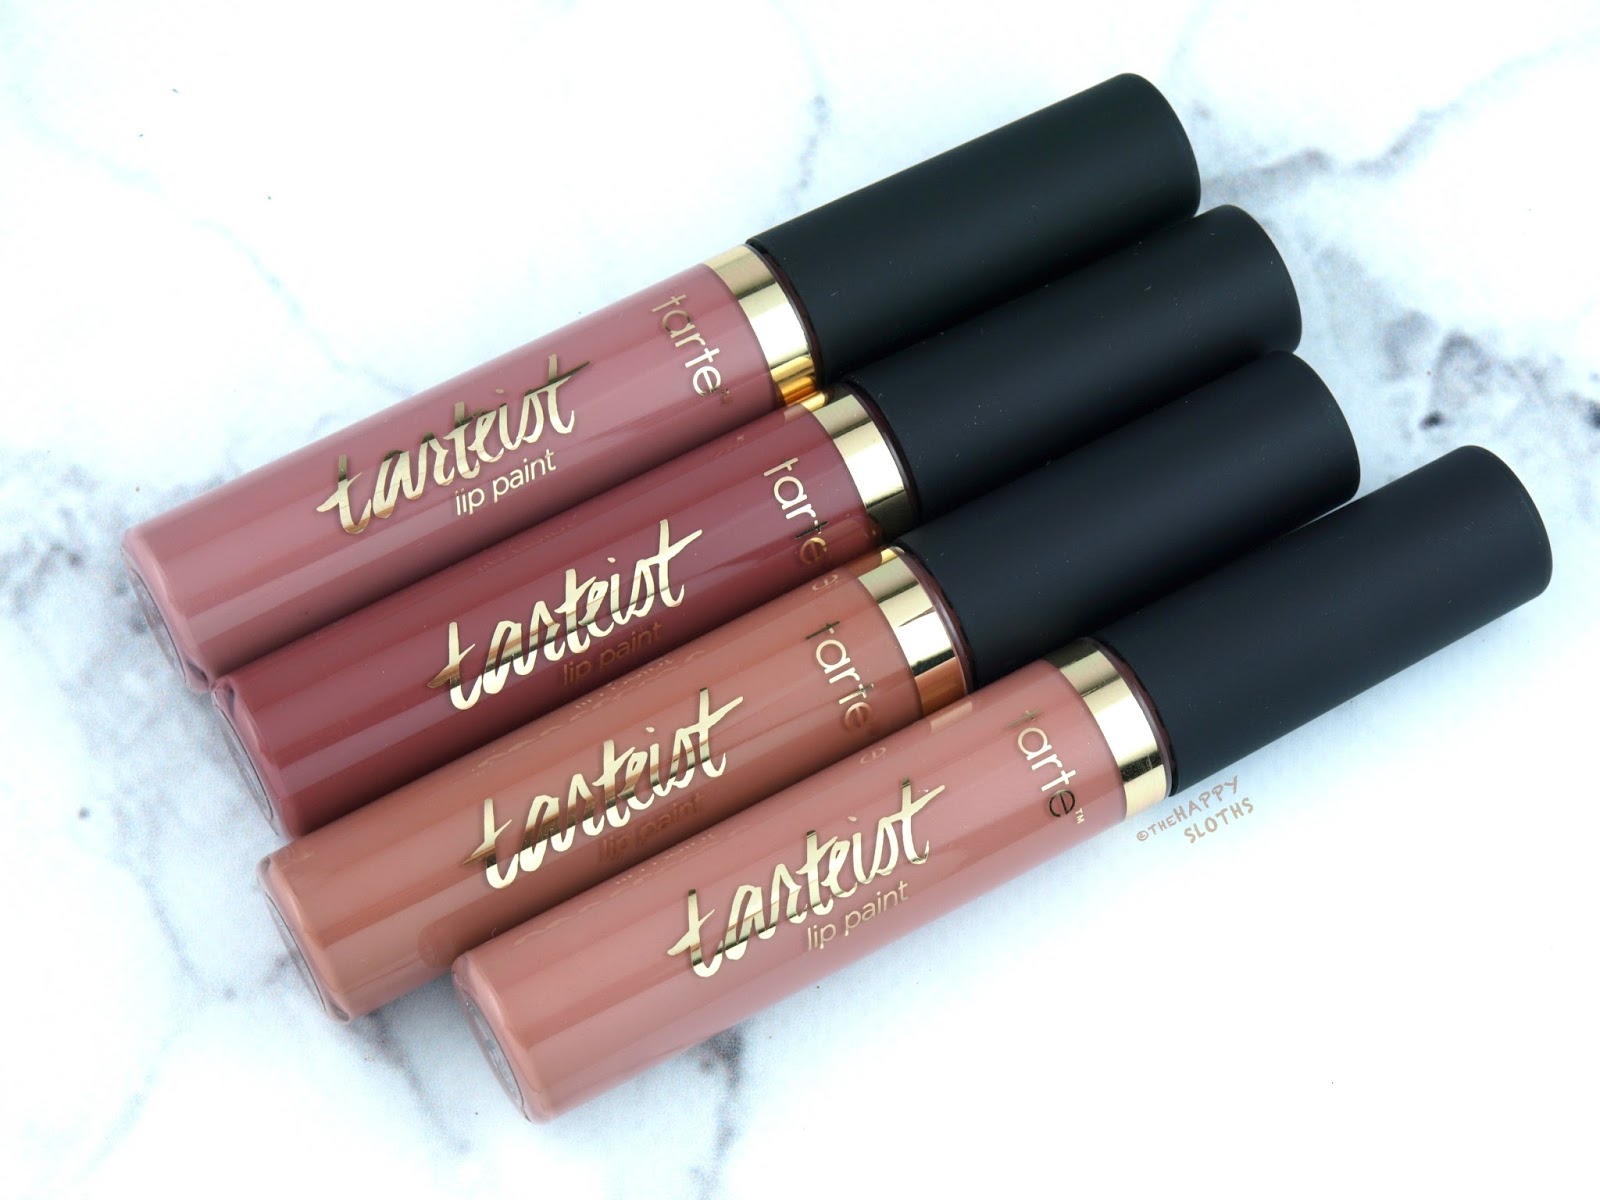 Tarte Tarteist Quick Dry Lip Paint in "Exposed", "Festival", "Low Key" & "Obsessed": Review and Swatches